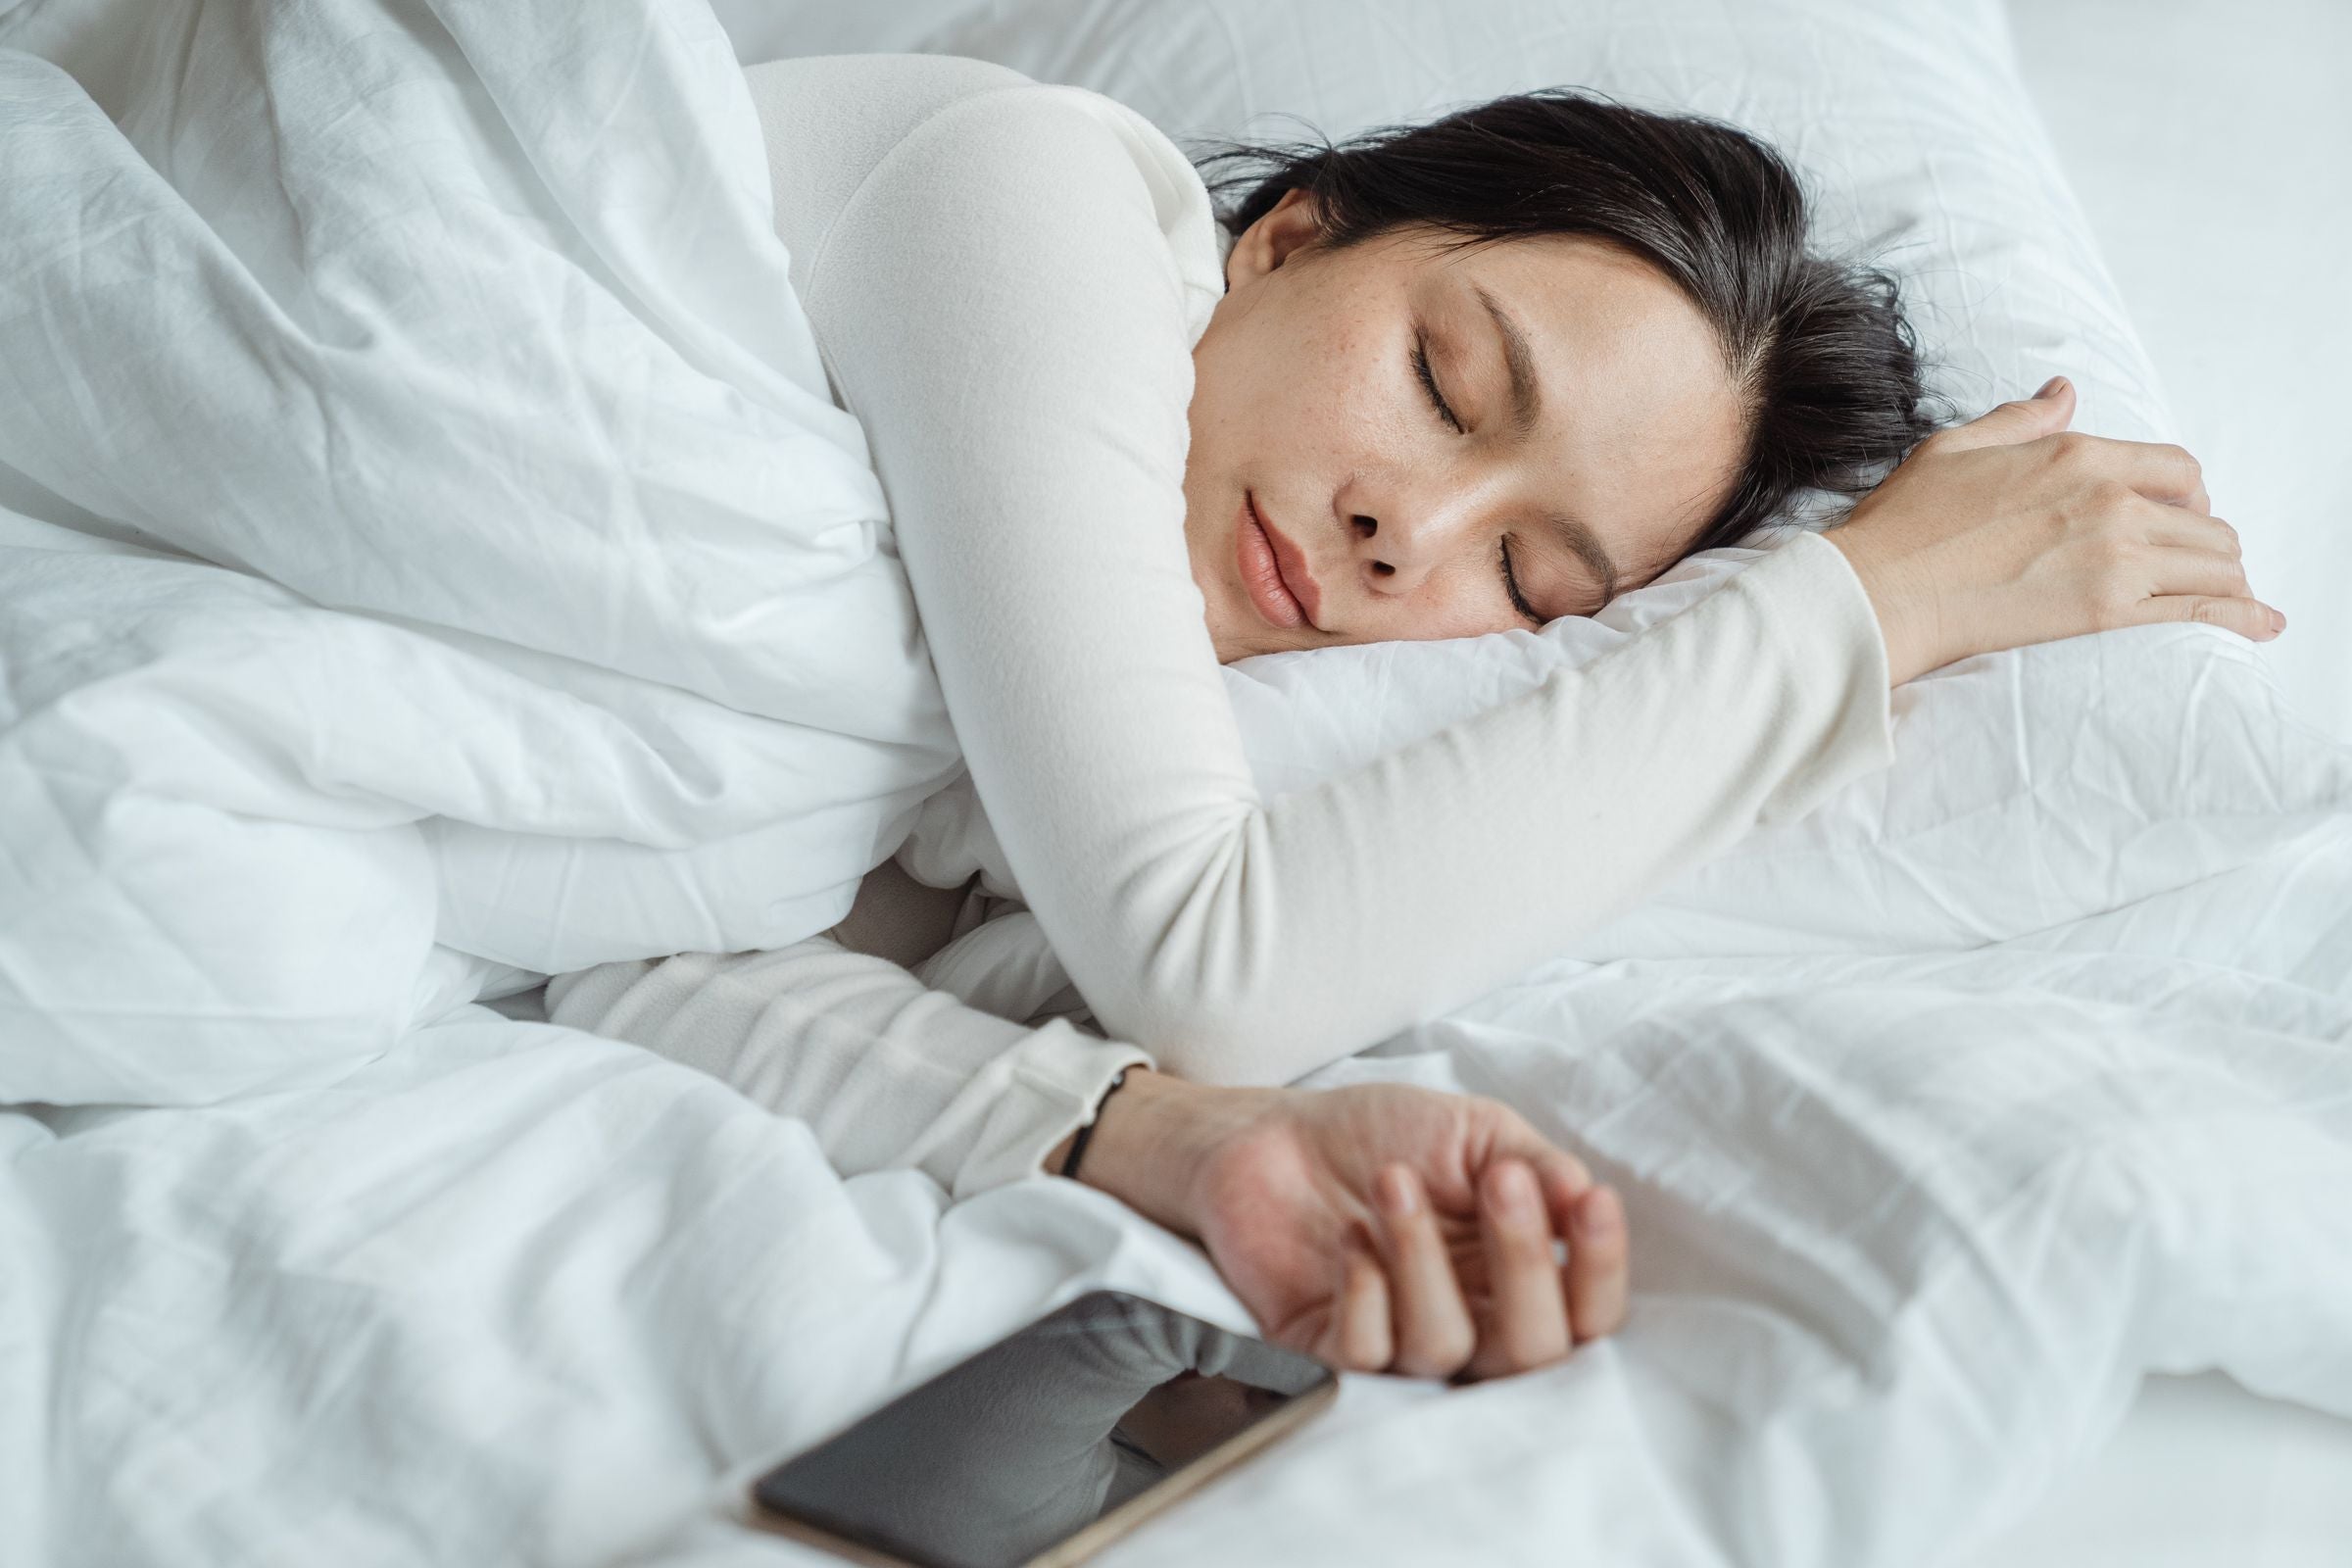 How To Implement and Improve Your Sleep Hygiene